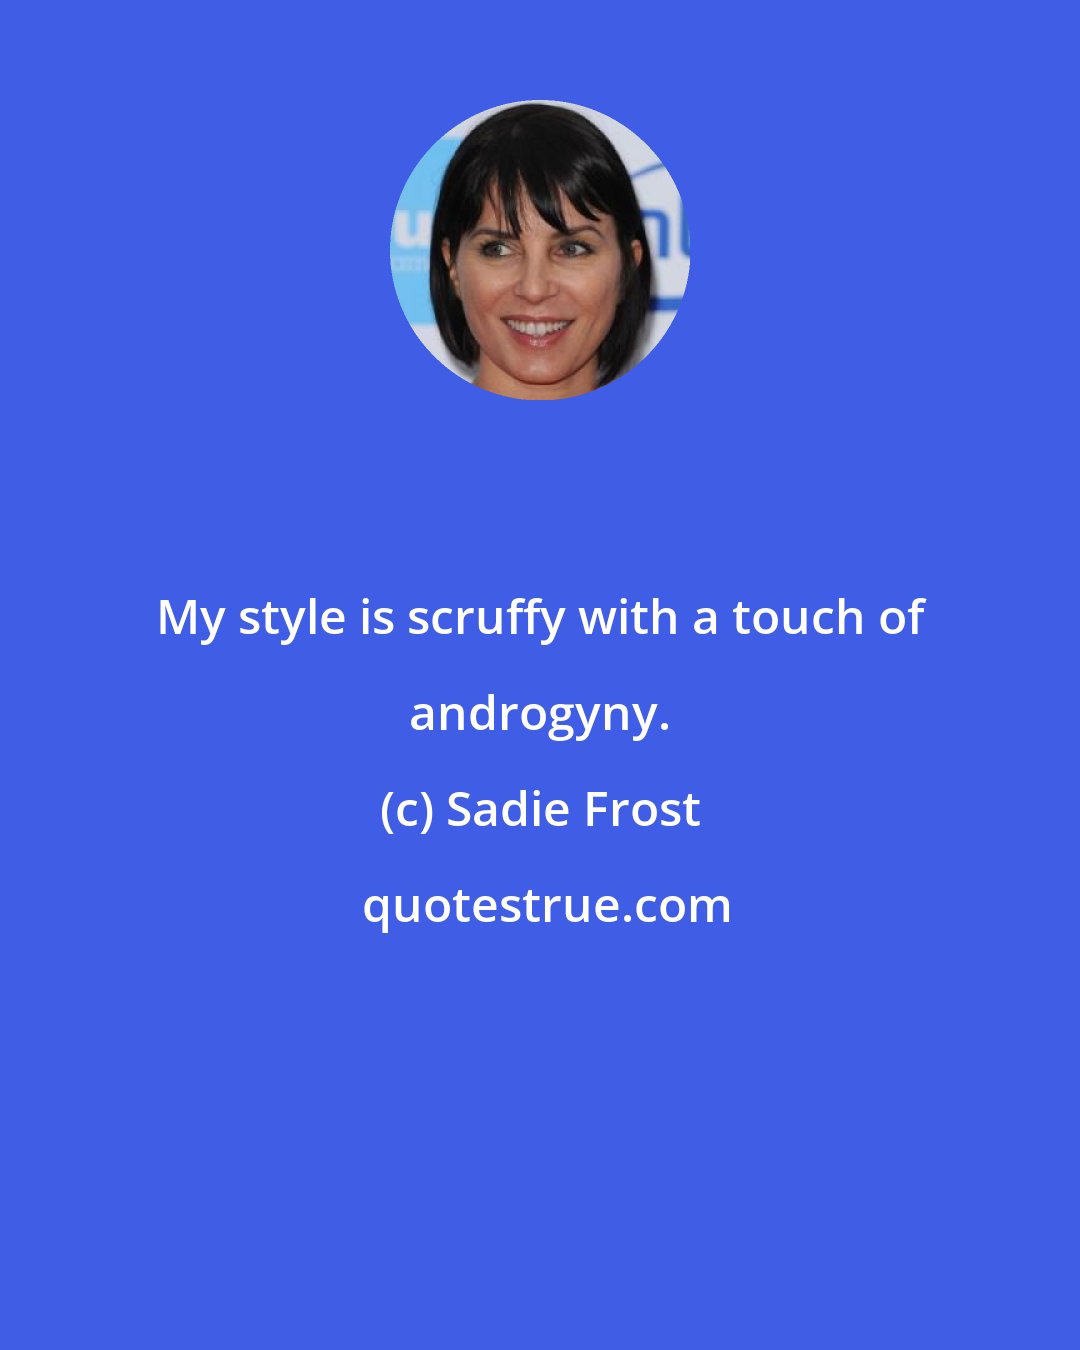 Sadie Frost: My style is scruffy with a touch of androgyny.